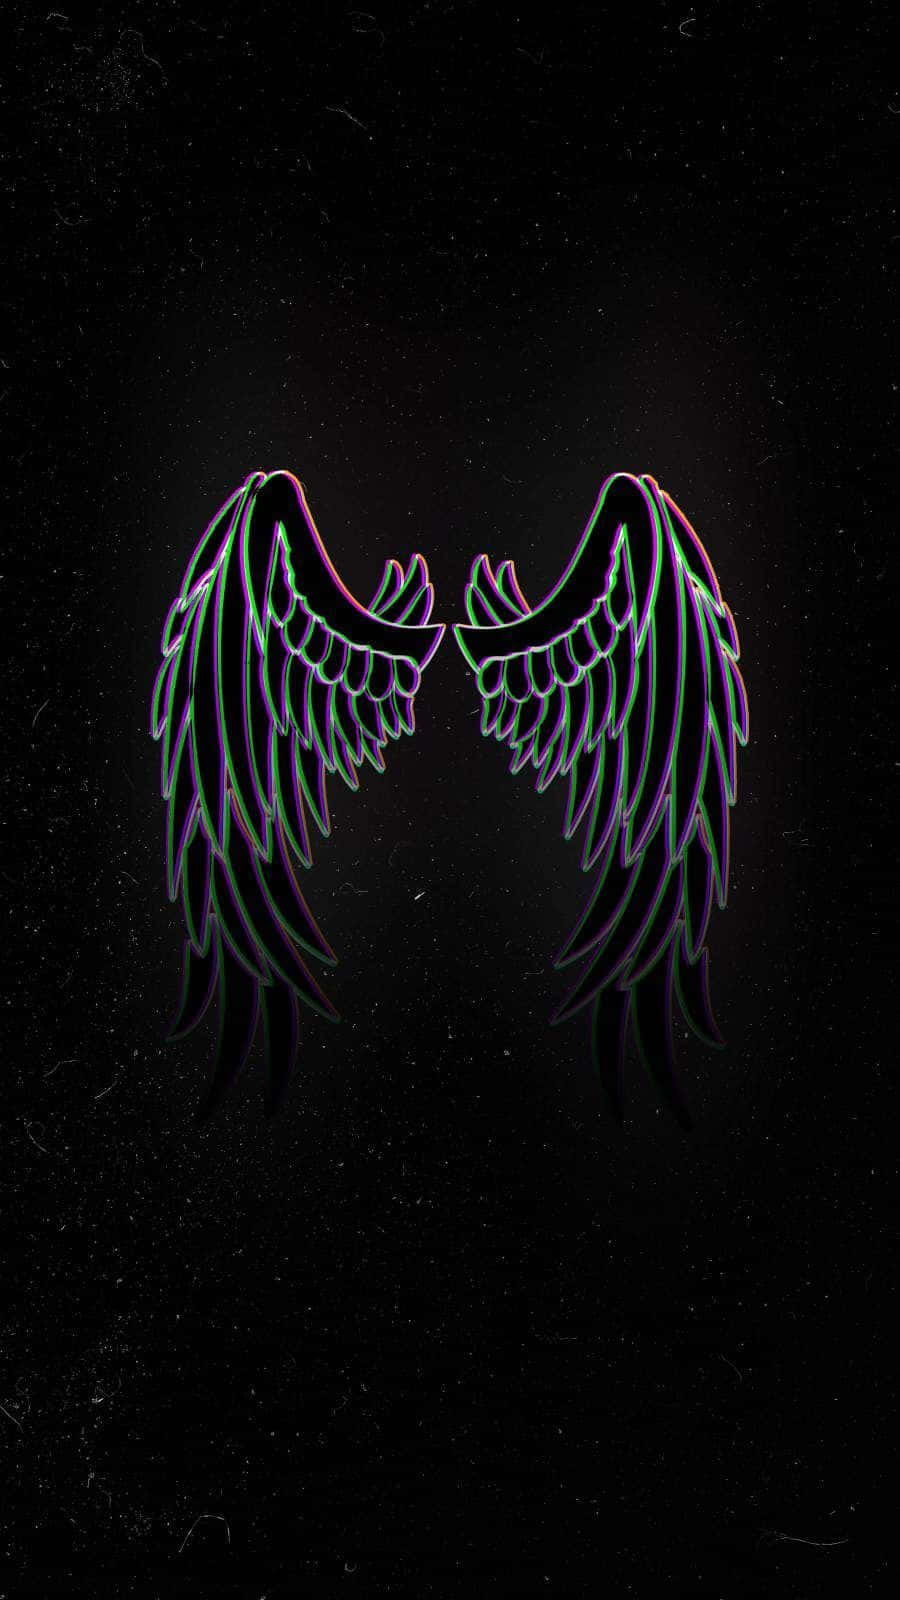 Two Neon Wings On A Black Background